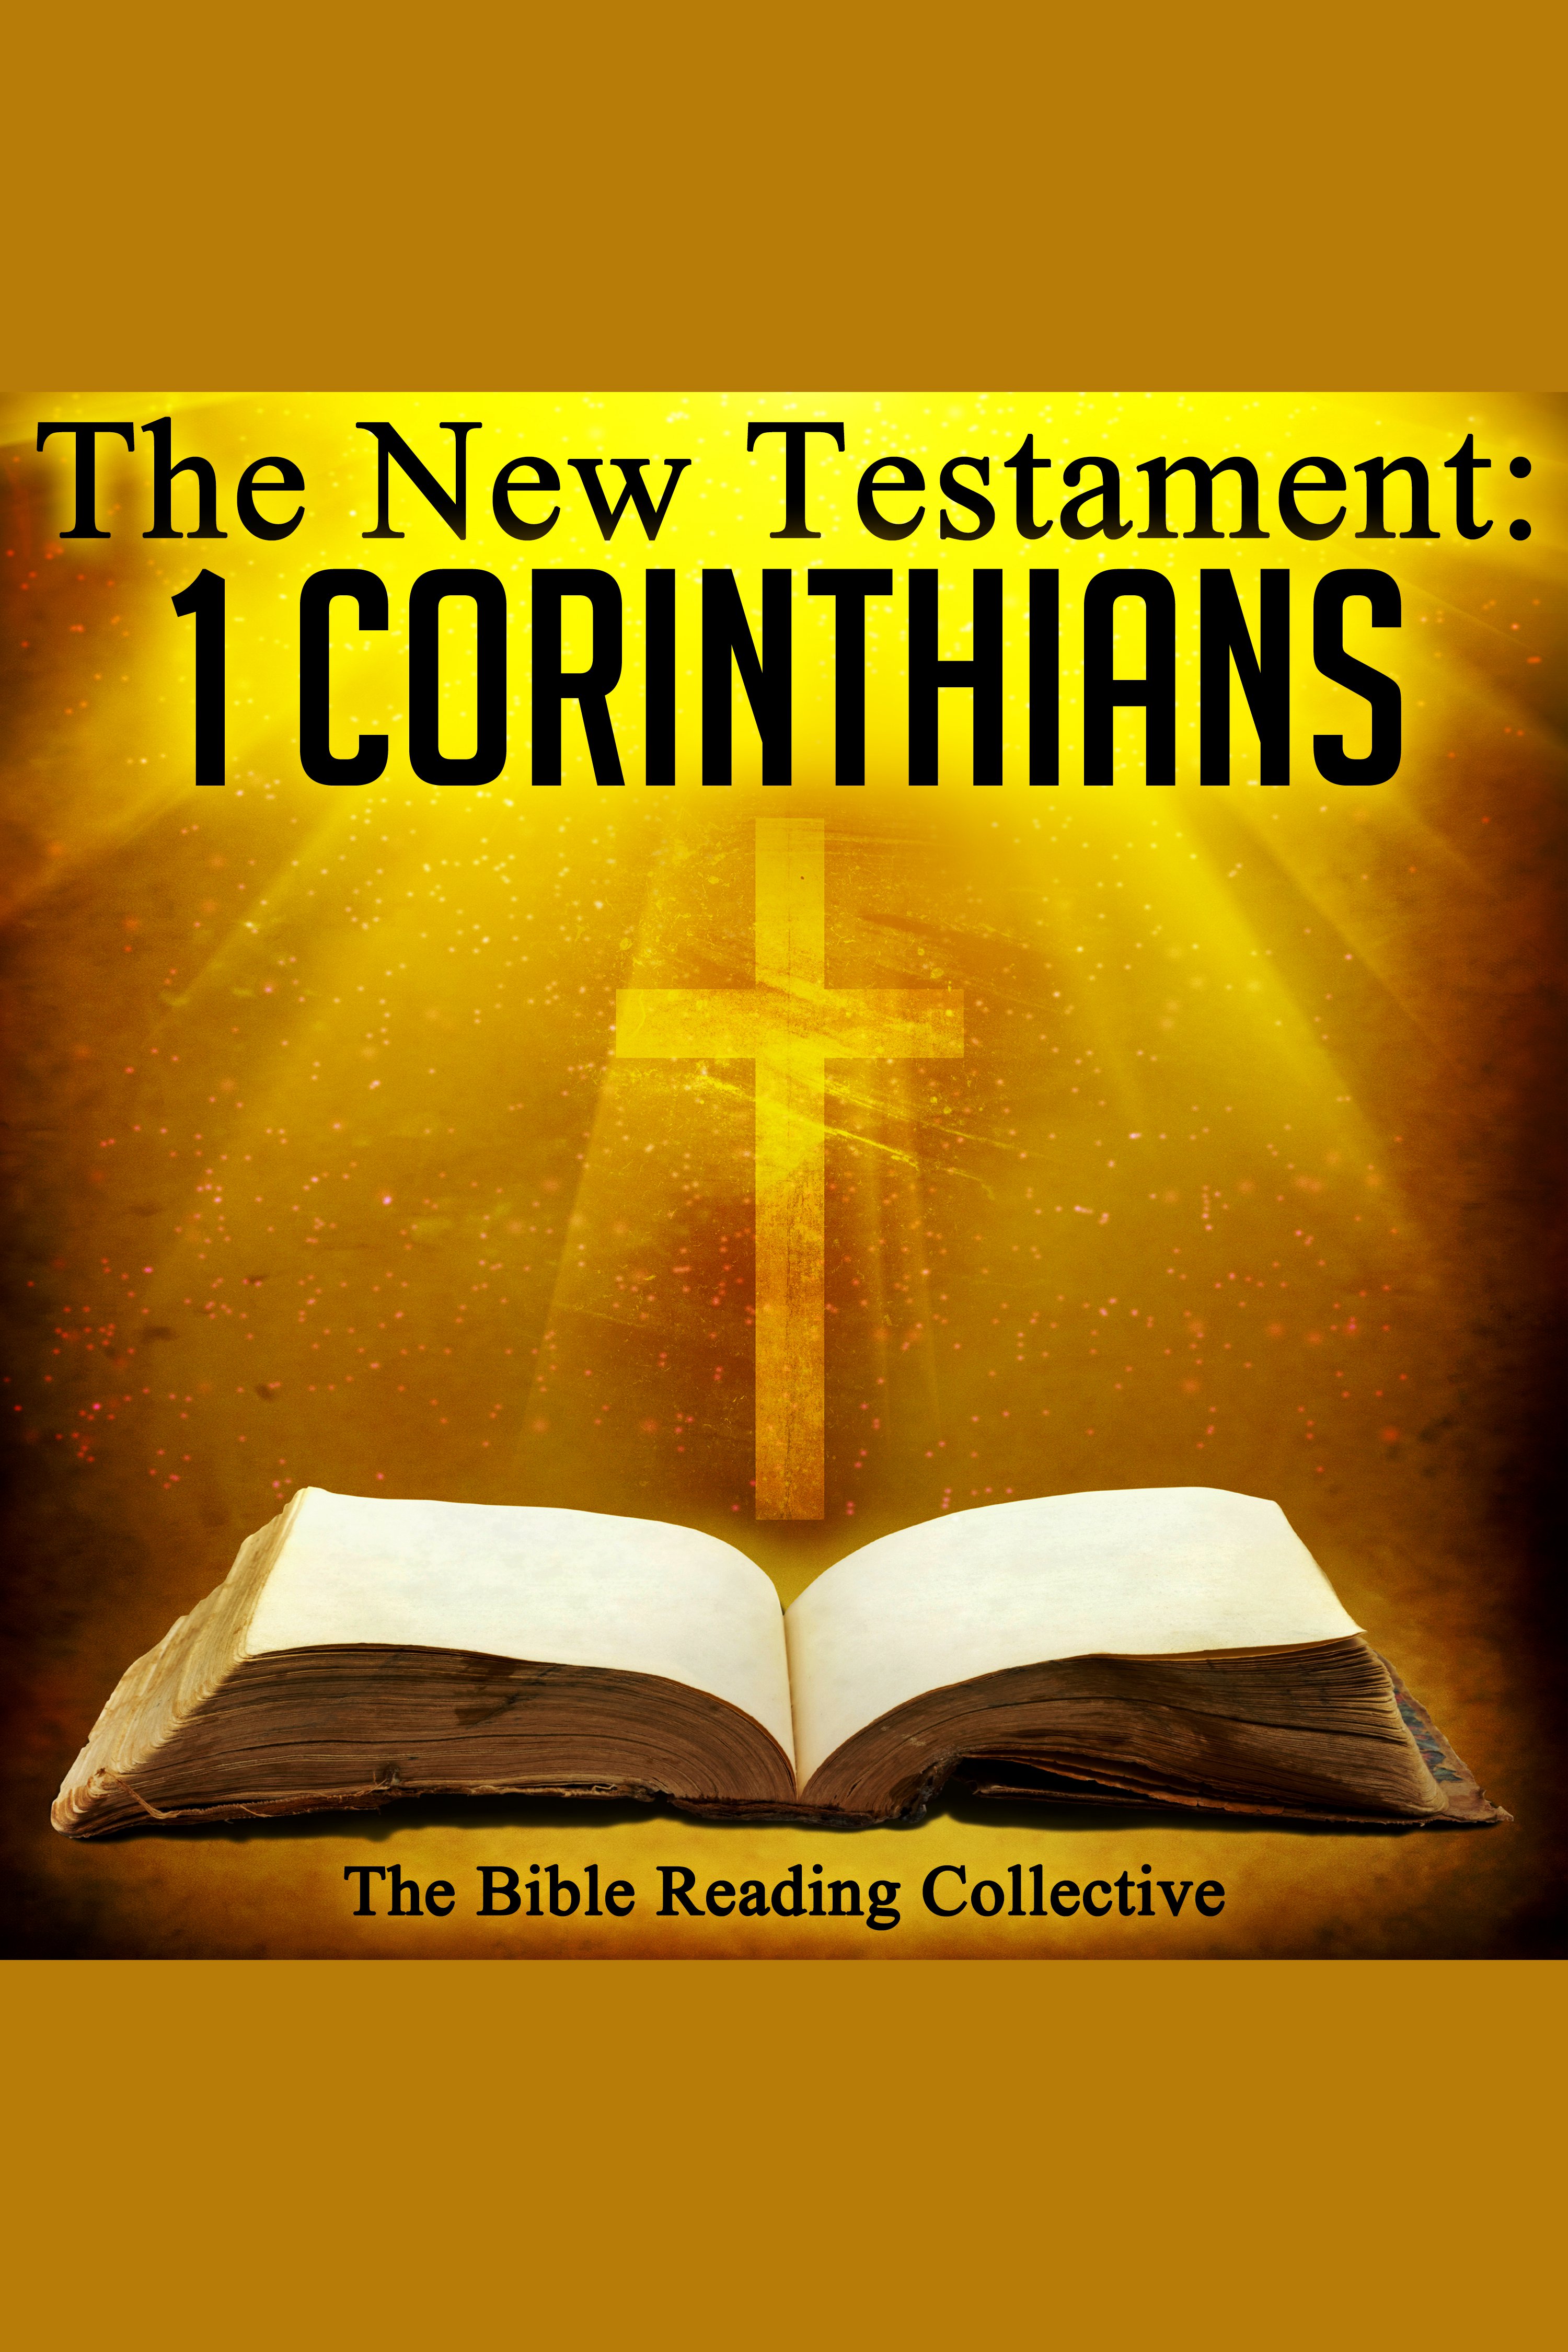 The New Testament: 1 Corinthians cover image